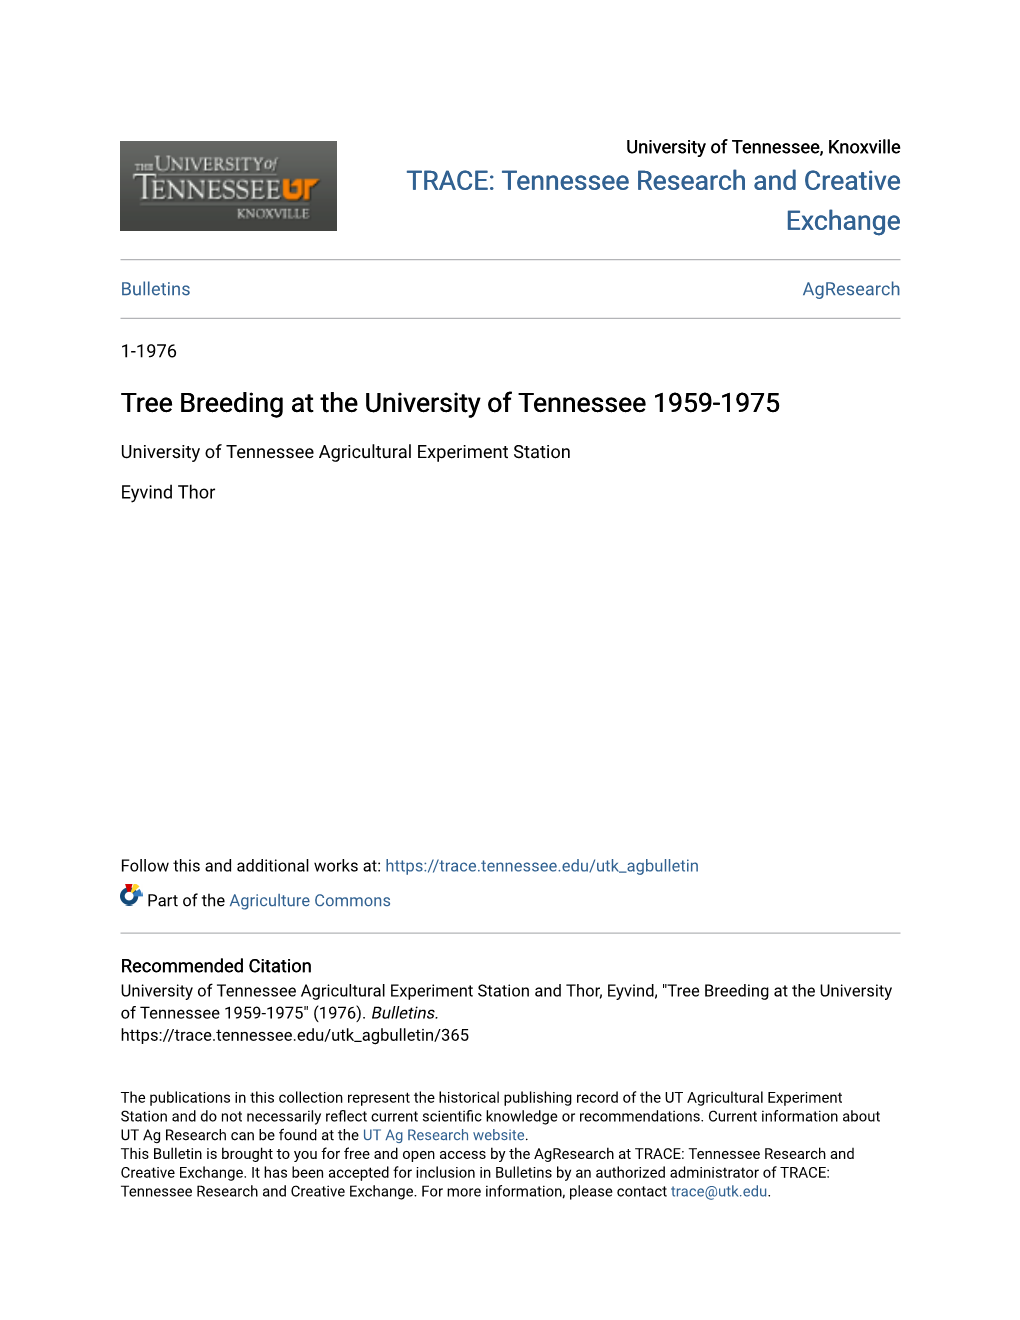 Tree Breeding at the University of Tennessee 1959-1975